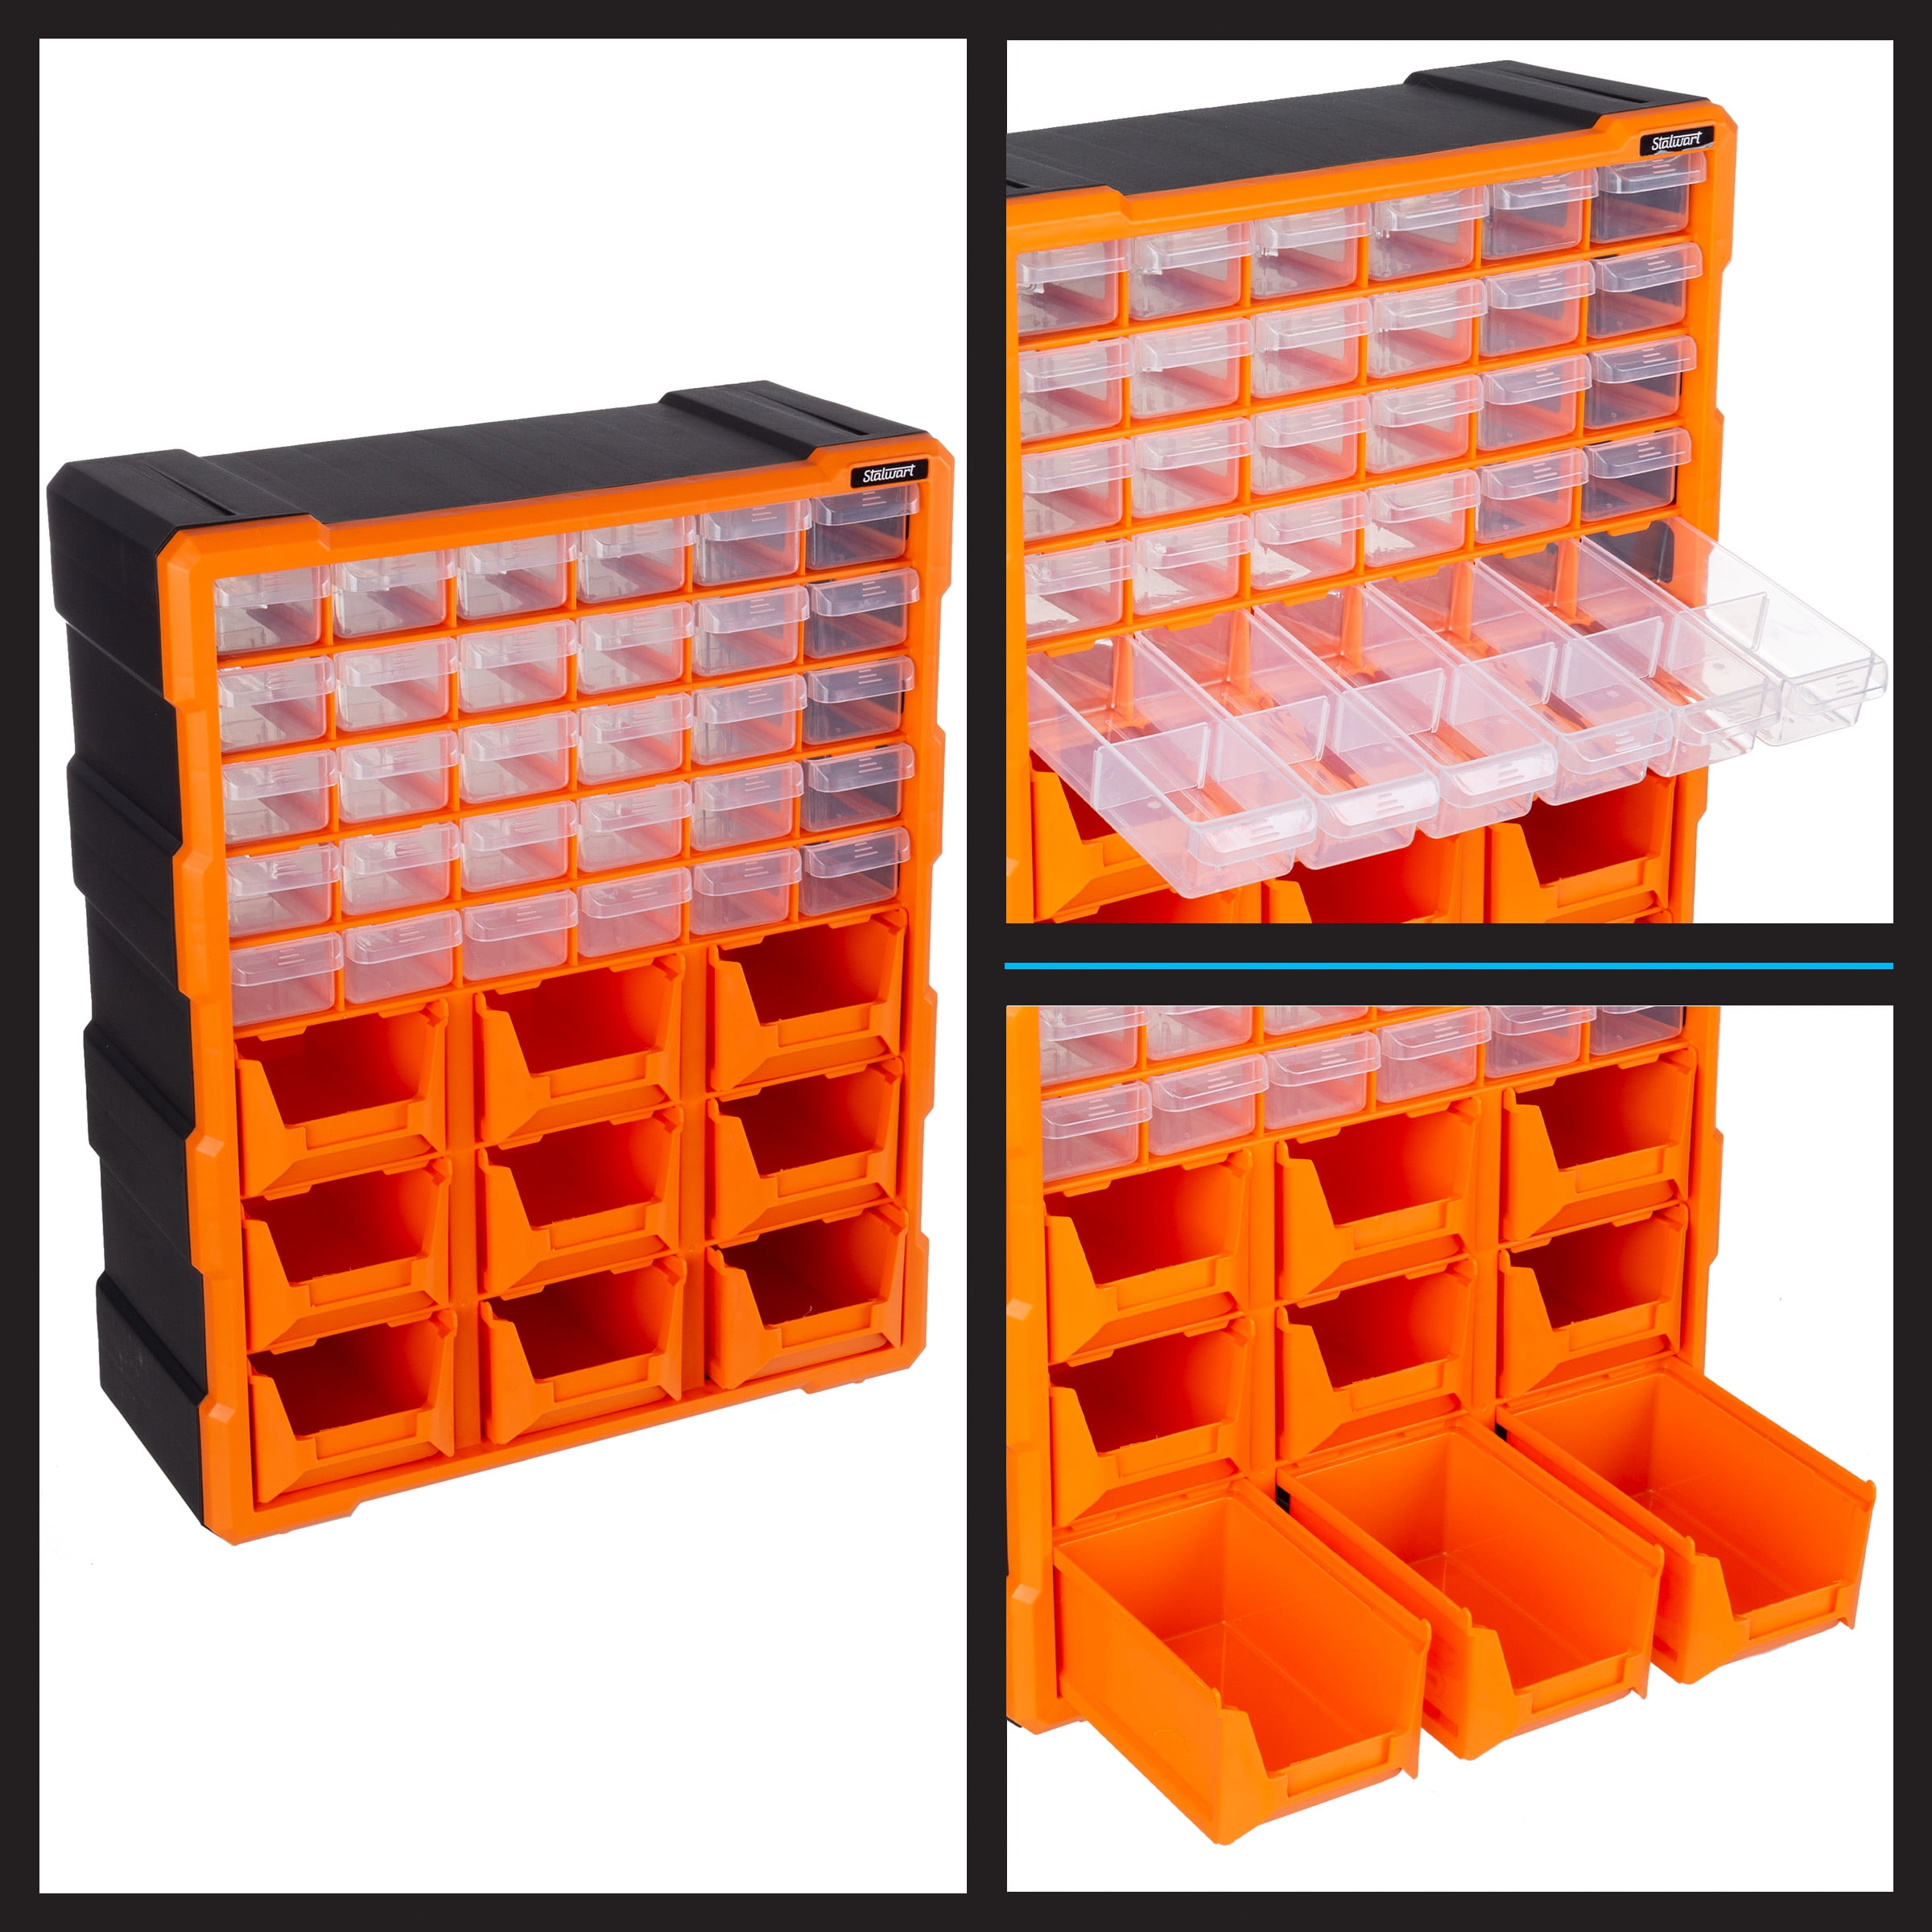 Storage Bin with Drawers - 41-Drawer Plastic Tool Organizer - Hardware or  Craft Cabinet for Storing Beads, Toys, or Nuts and Bolts by Stalwart (Black)